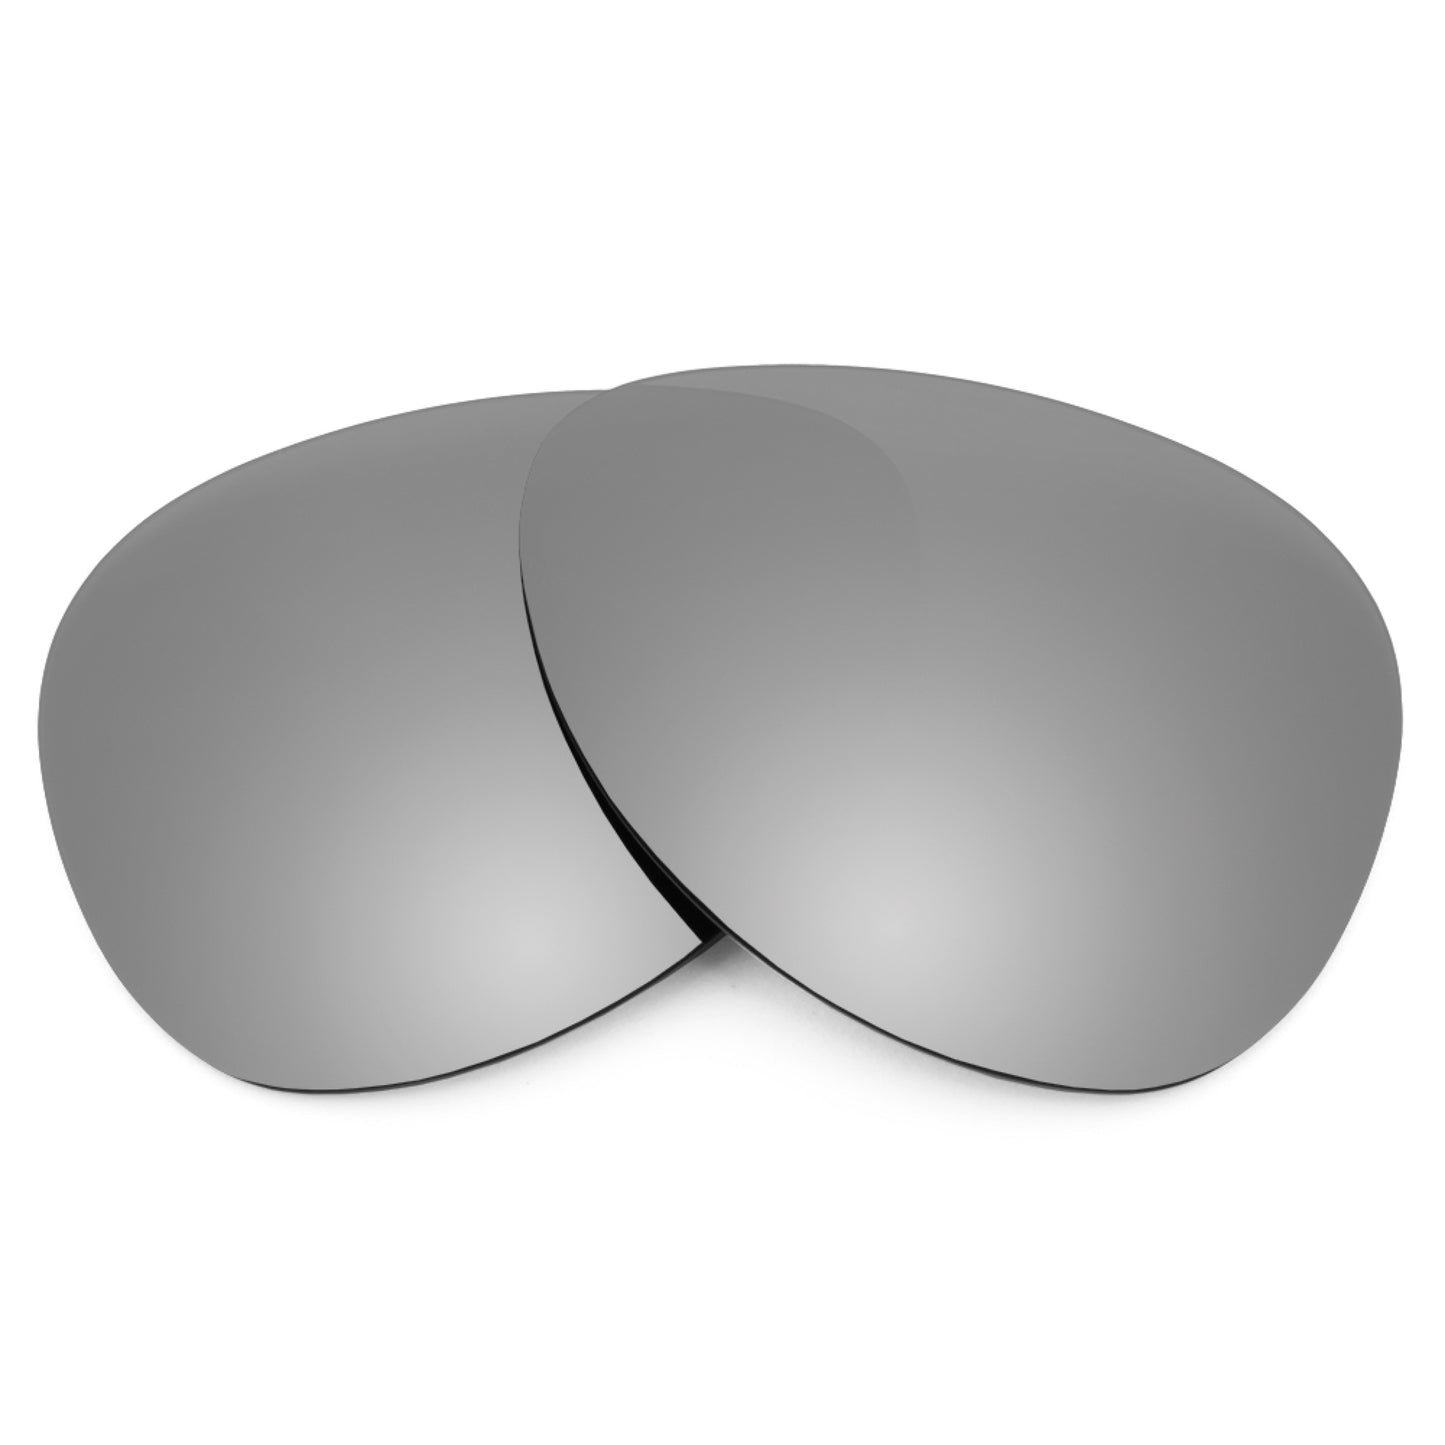 Revant replacement lenses for Ray-Ban Aviator RB3025 58mm Non-Polarized Titanium